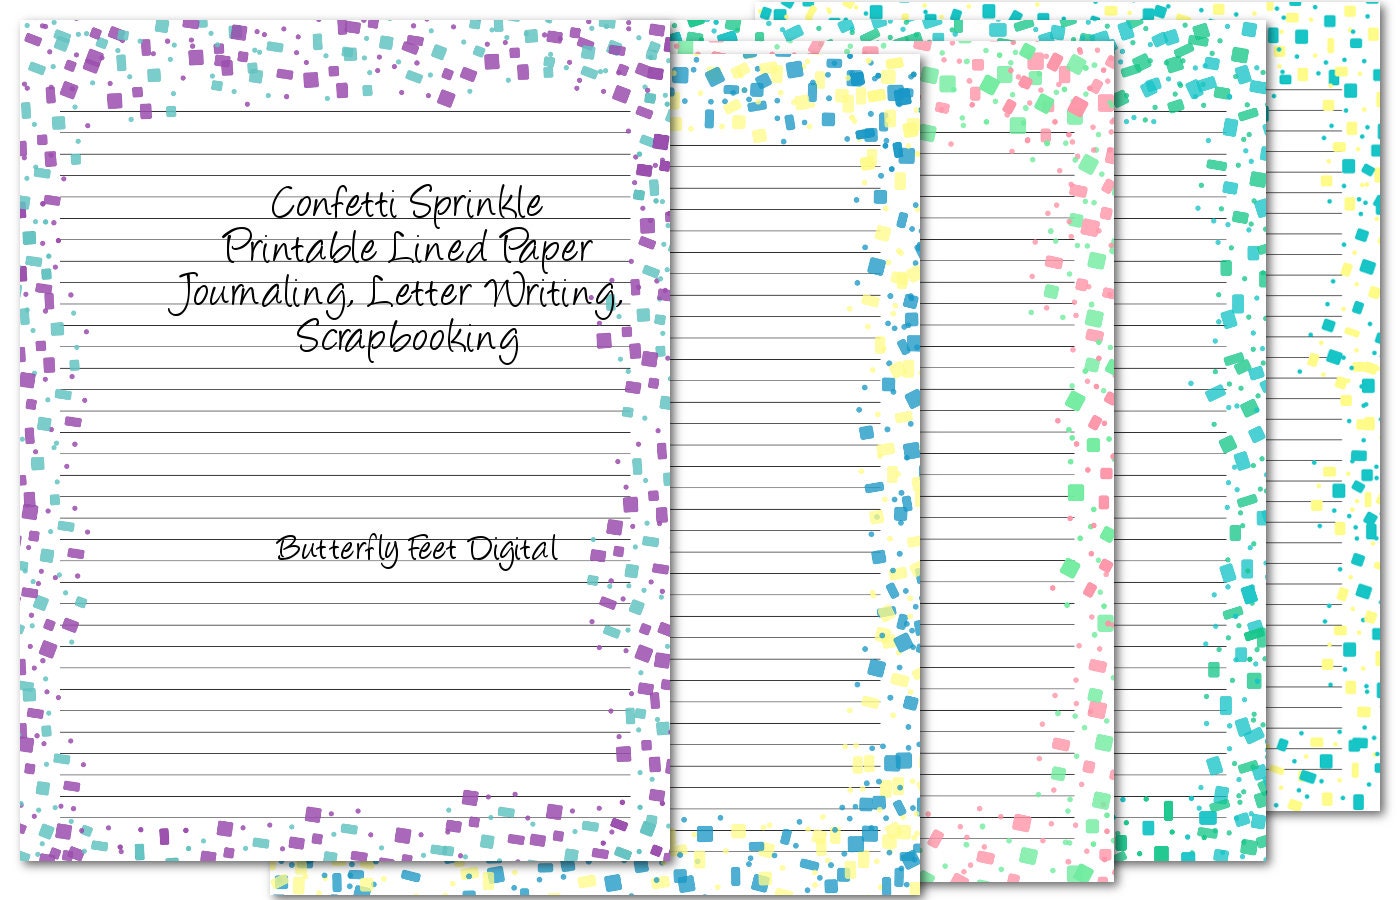 Confetti Stationery Paper for Writing Letters, Printing (8.5 x 11